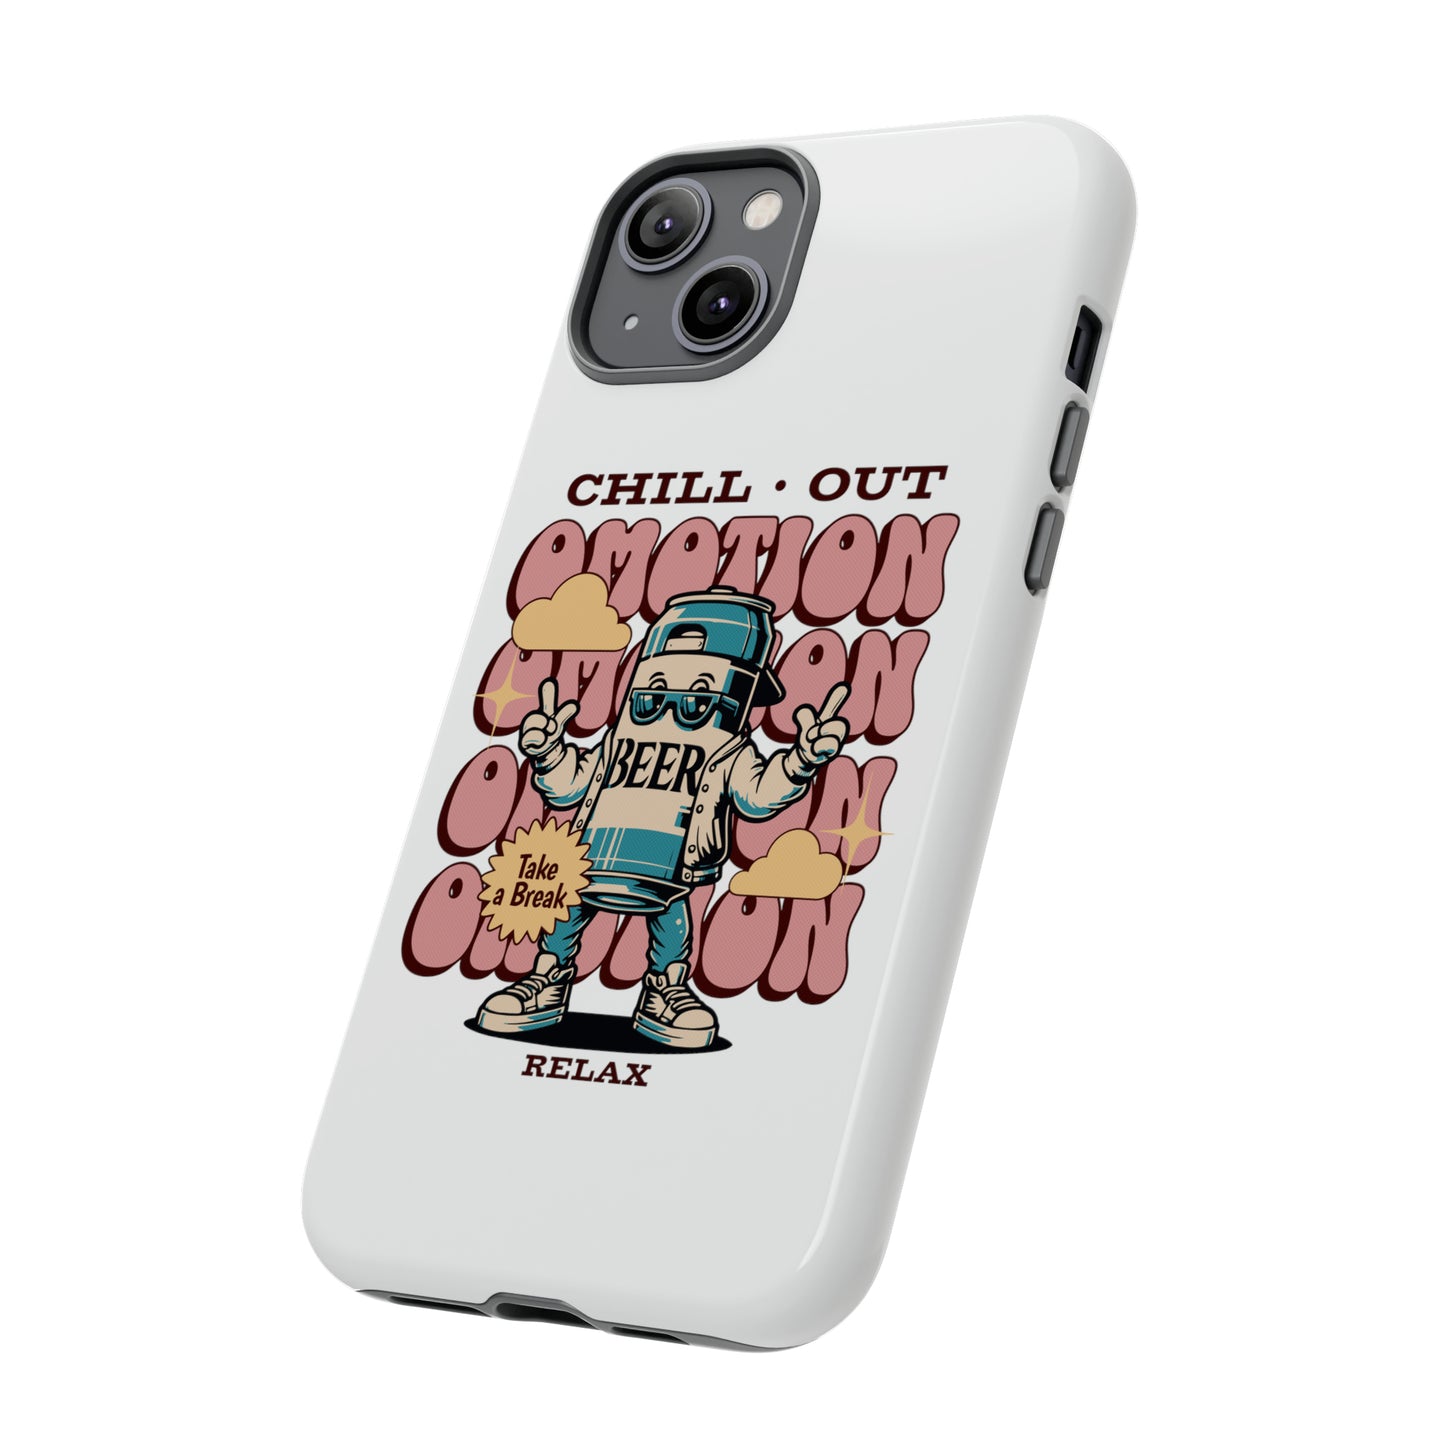 Chill Out Omotion iPhone Case